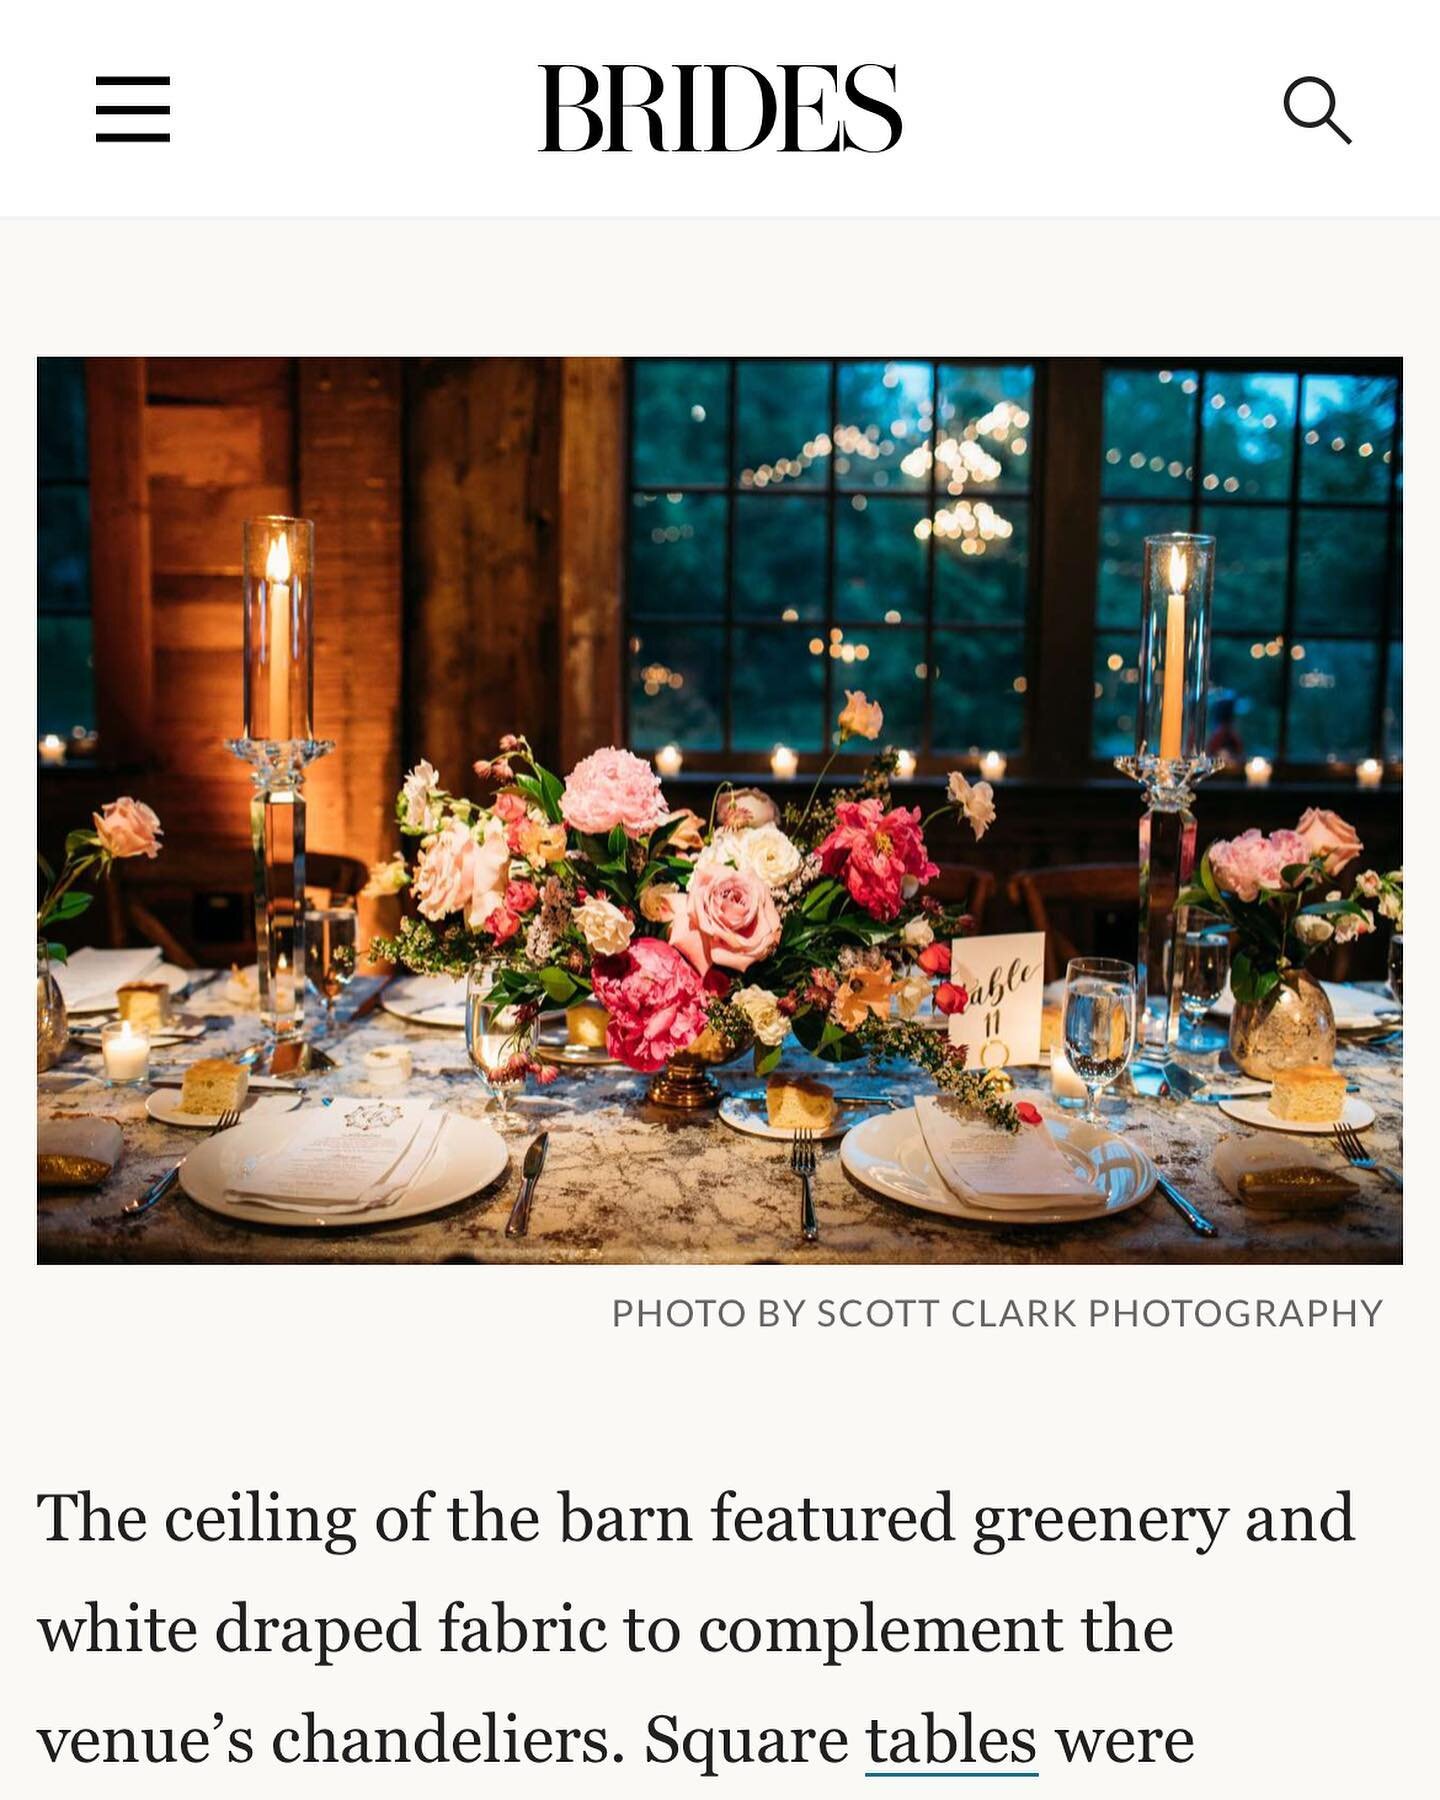 When you get a tiny feature in 
@brides magazine! Check out the article and see the stunningness of @mshantib and Rohan&rsquo;s wedding for yourself!
@amv_weddings @scottclarkphoto @thesistersofcedarlakes